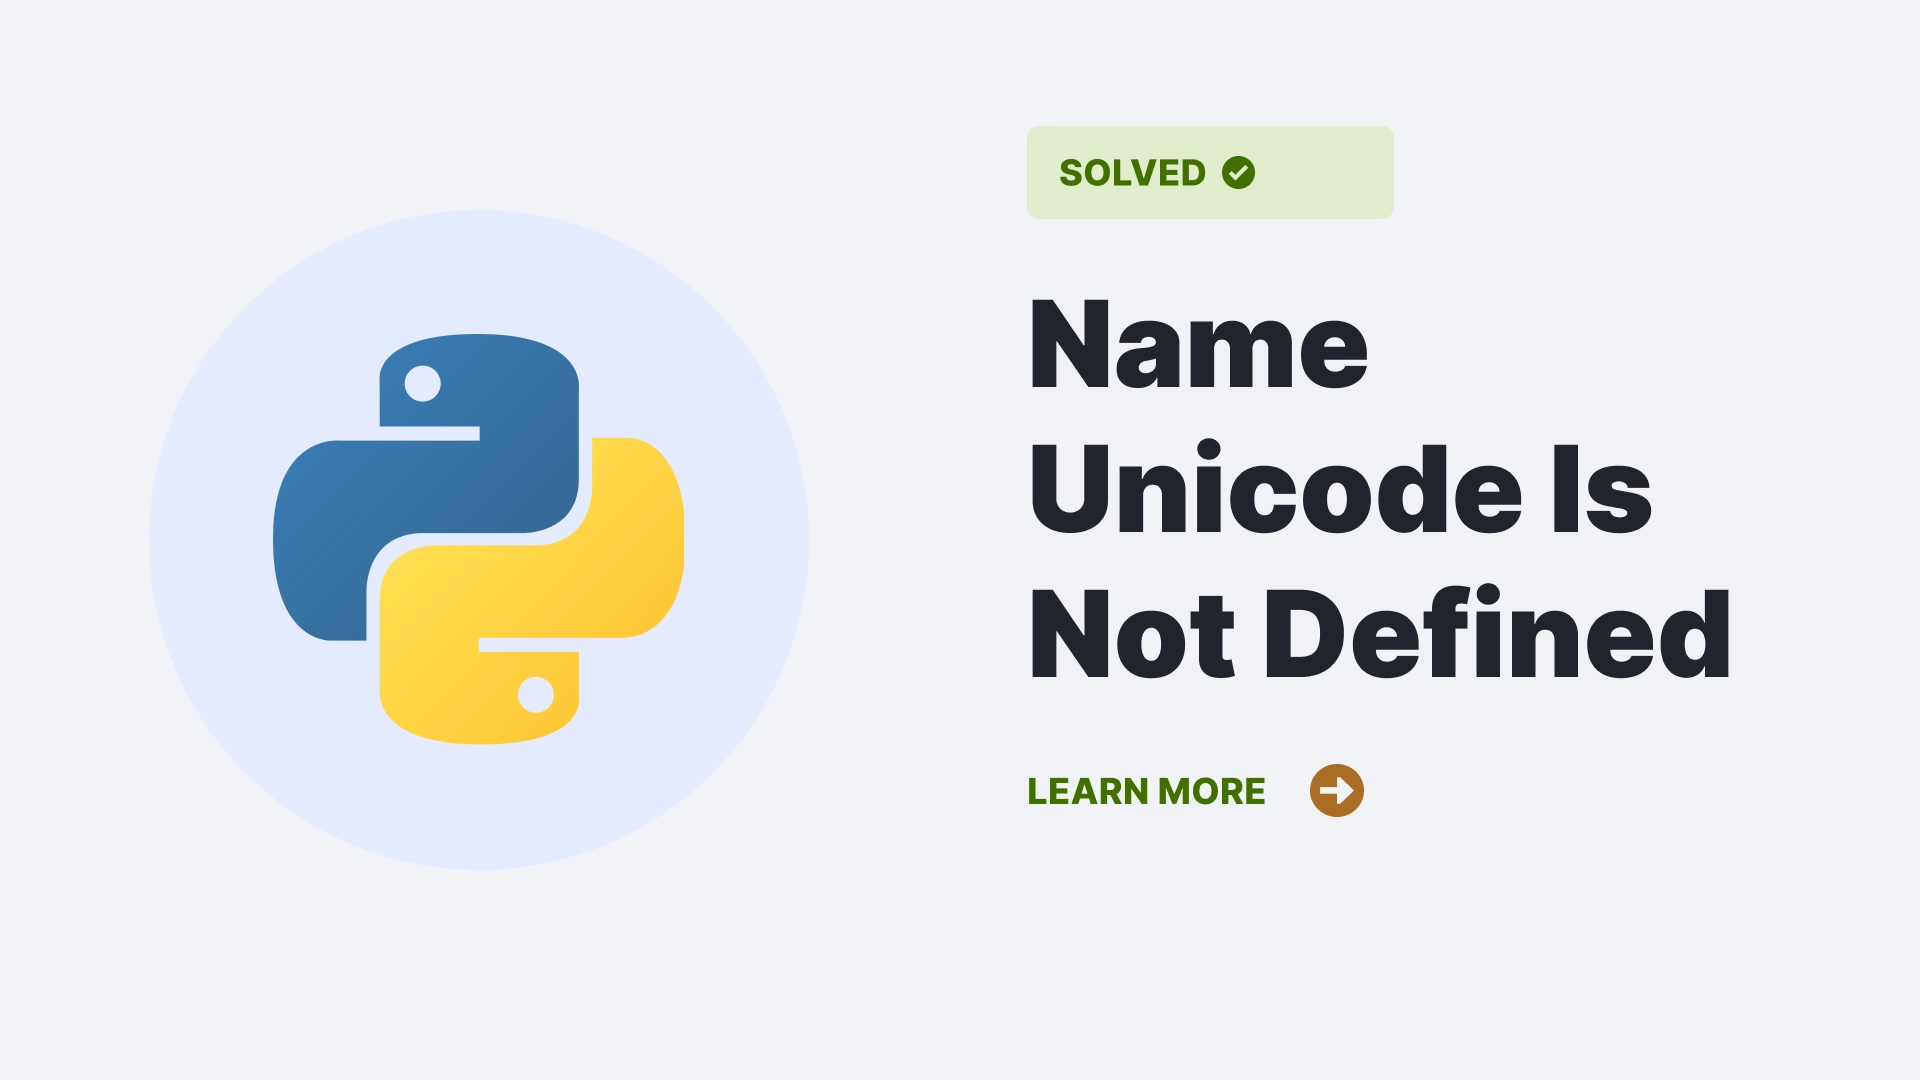 Name Unicode Is Not Defined